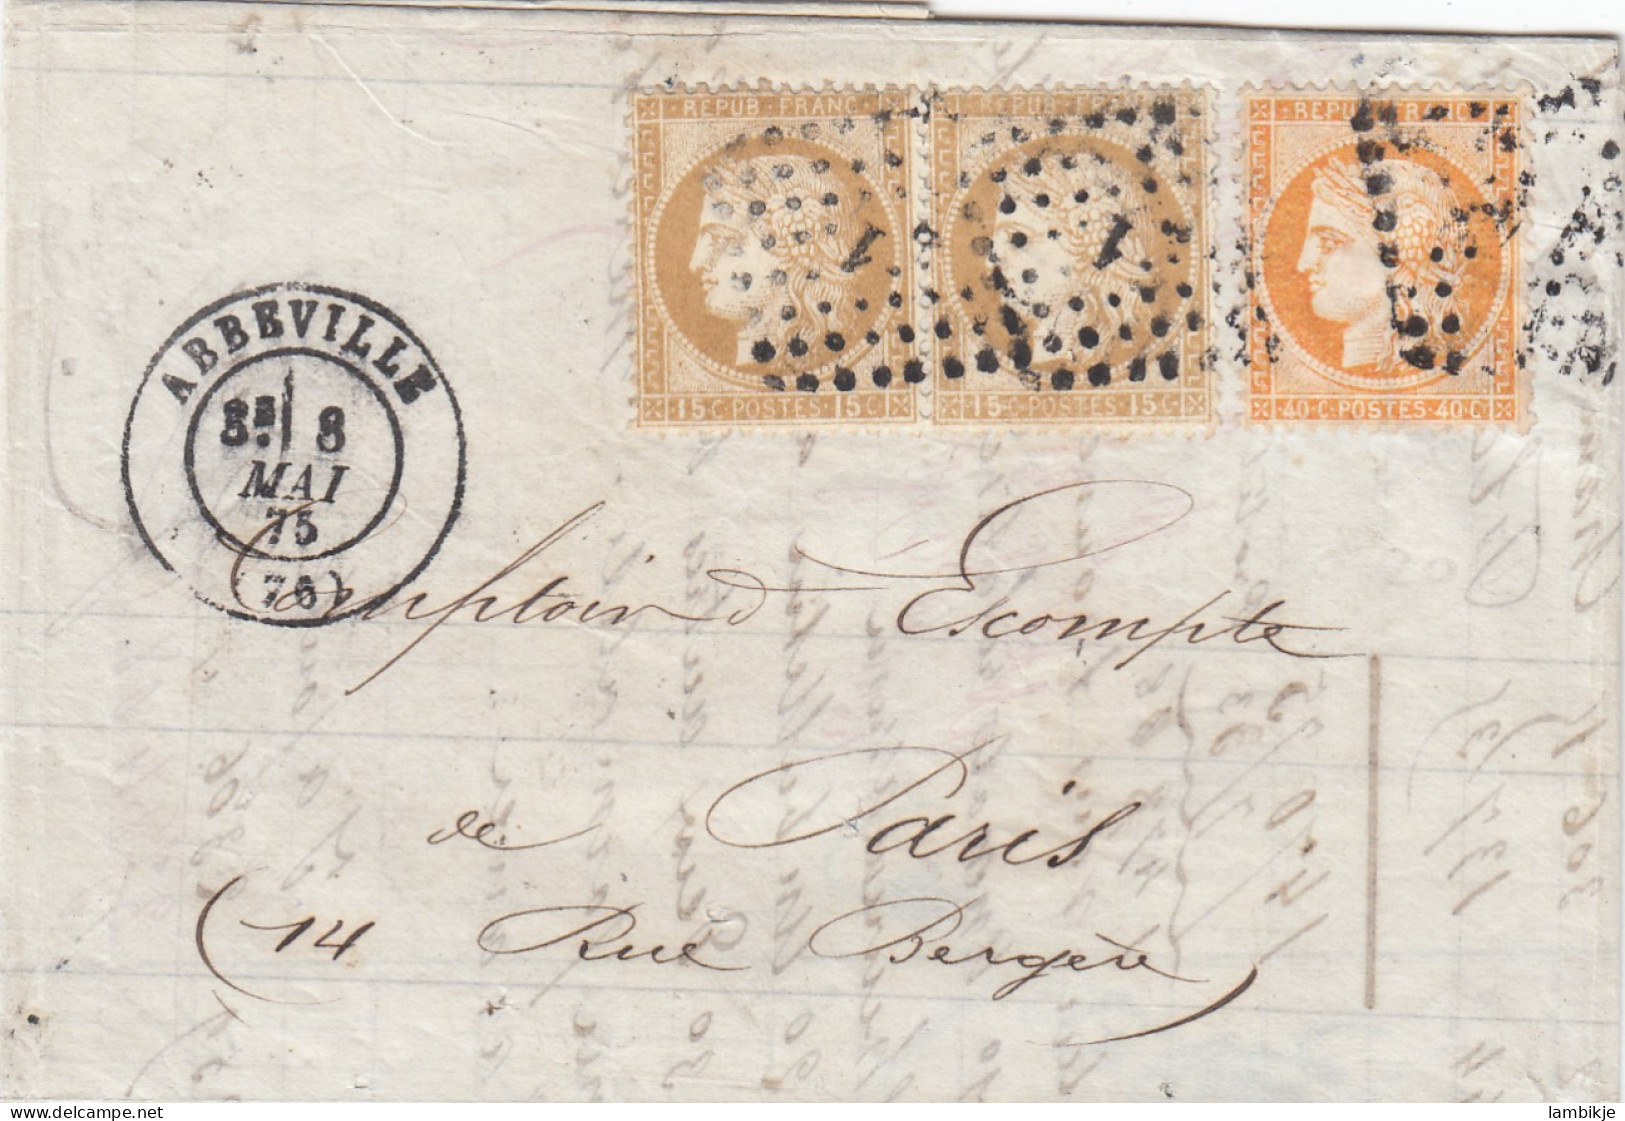 France Cover 1875 - 1871-1875 Ceres